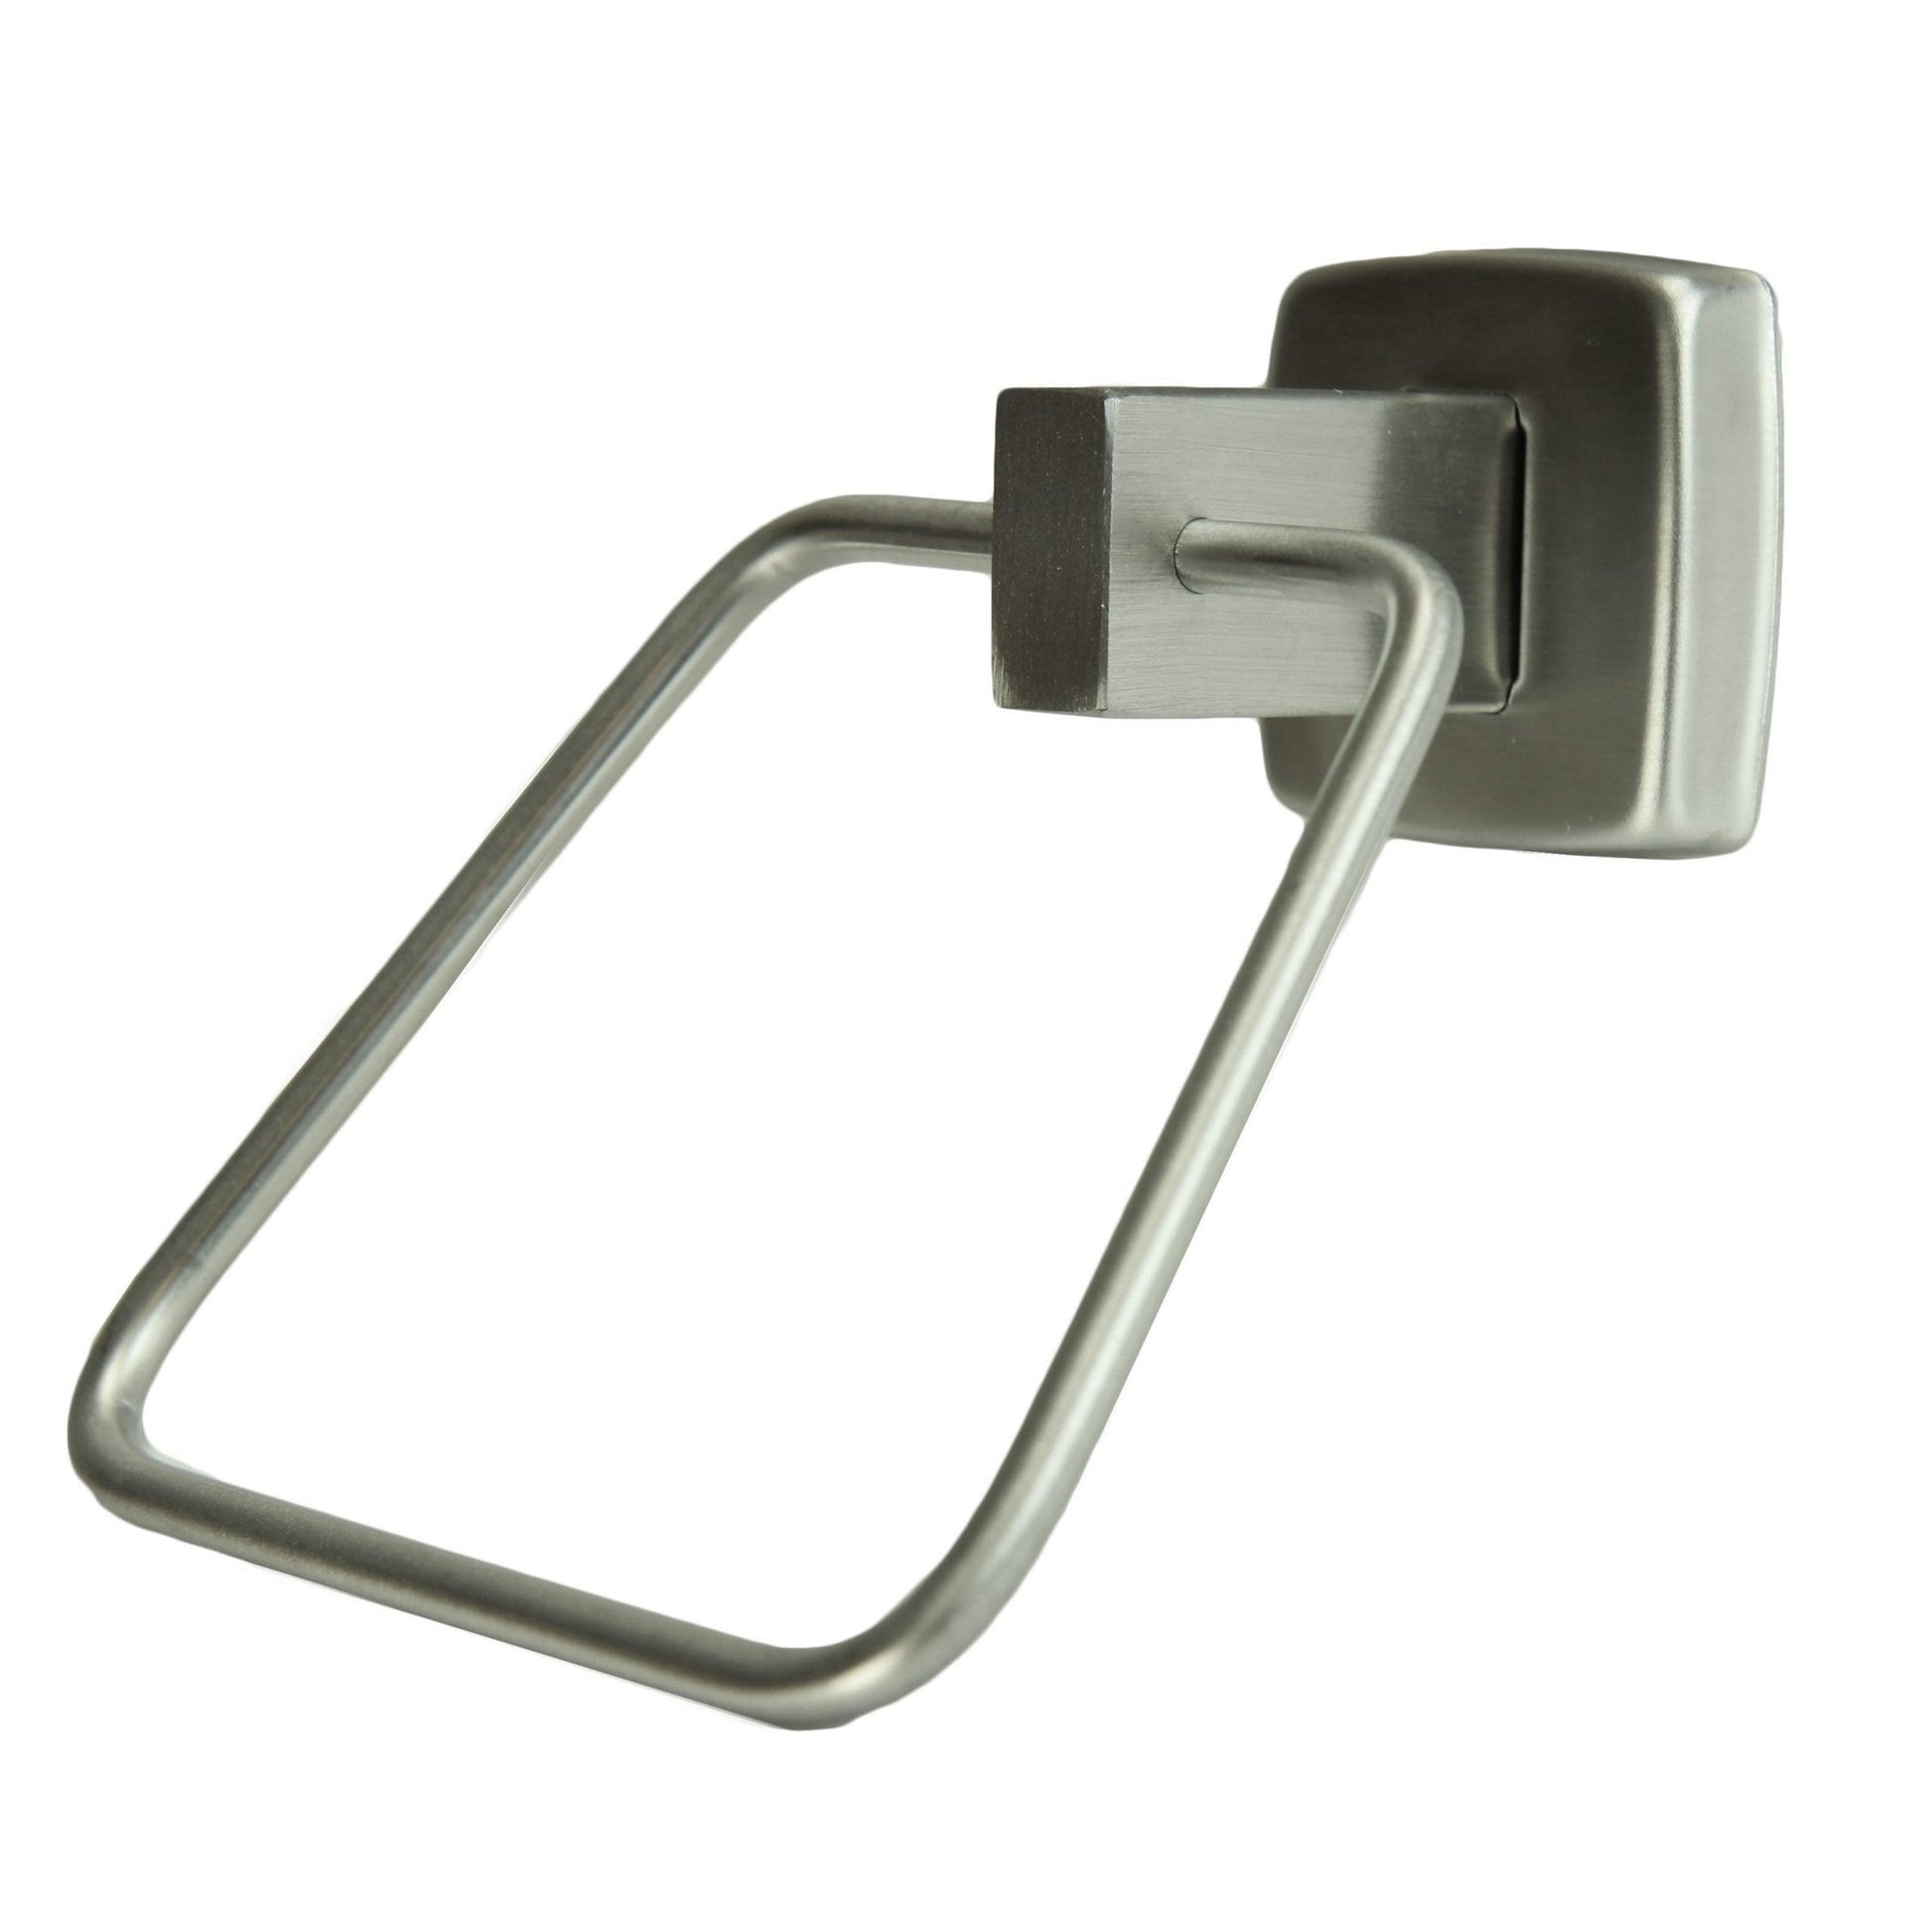 Frost 5 x 5 x 6 Stainless Steel Brushed Towel Rack